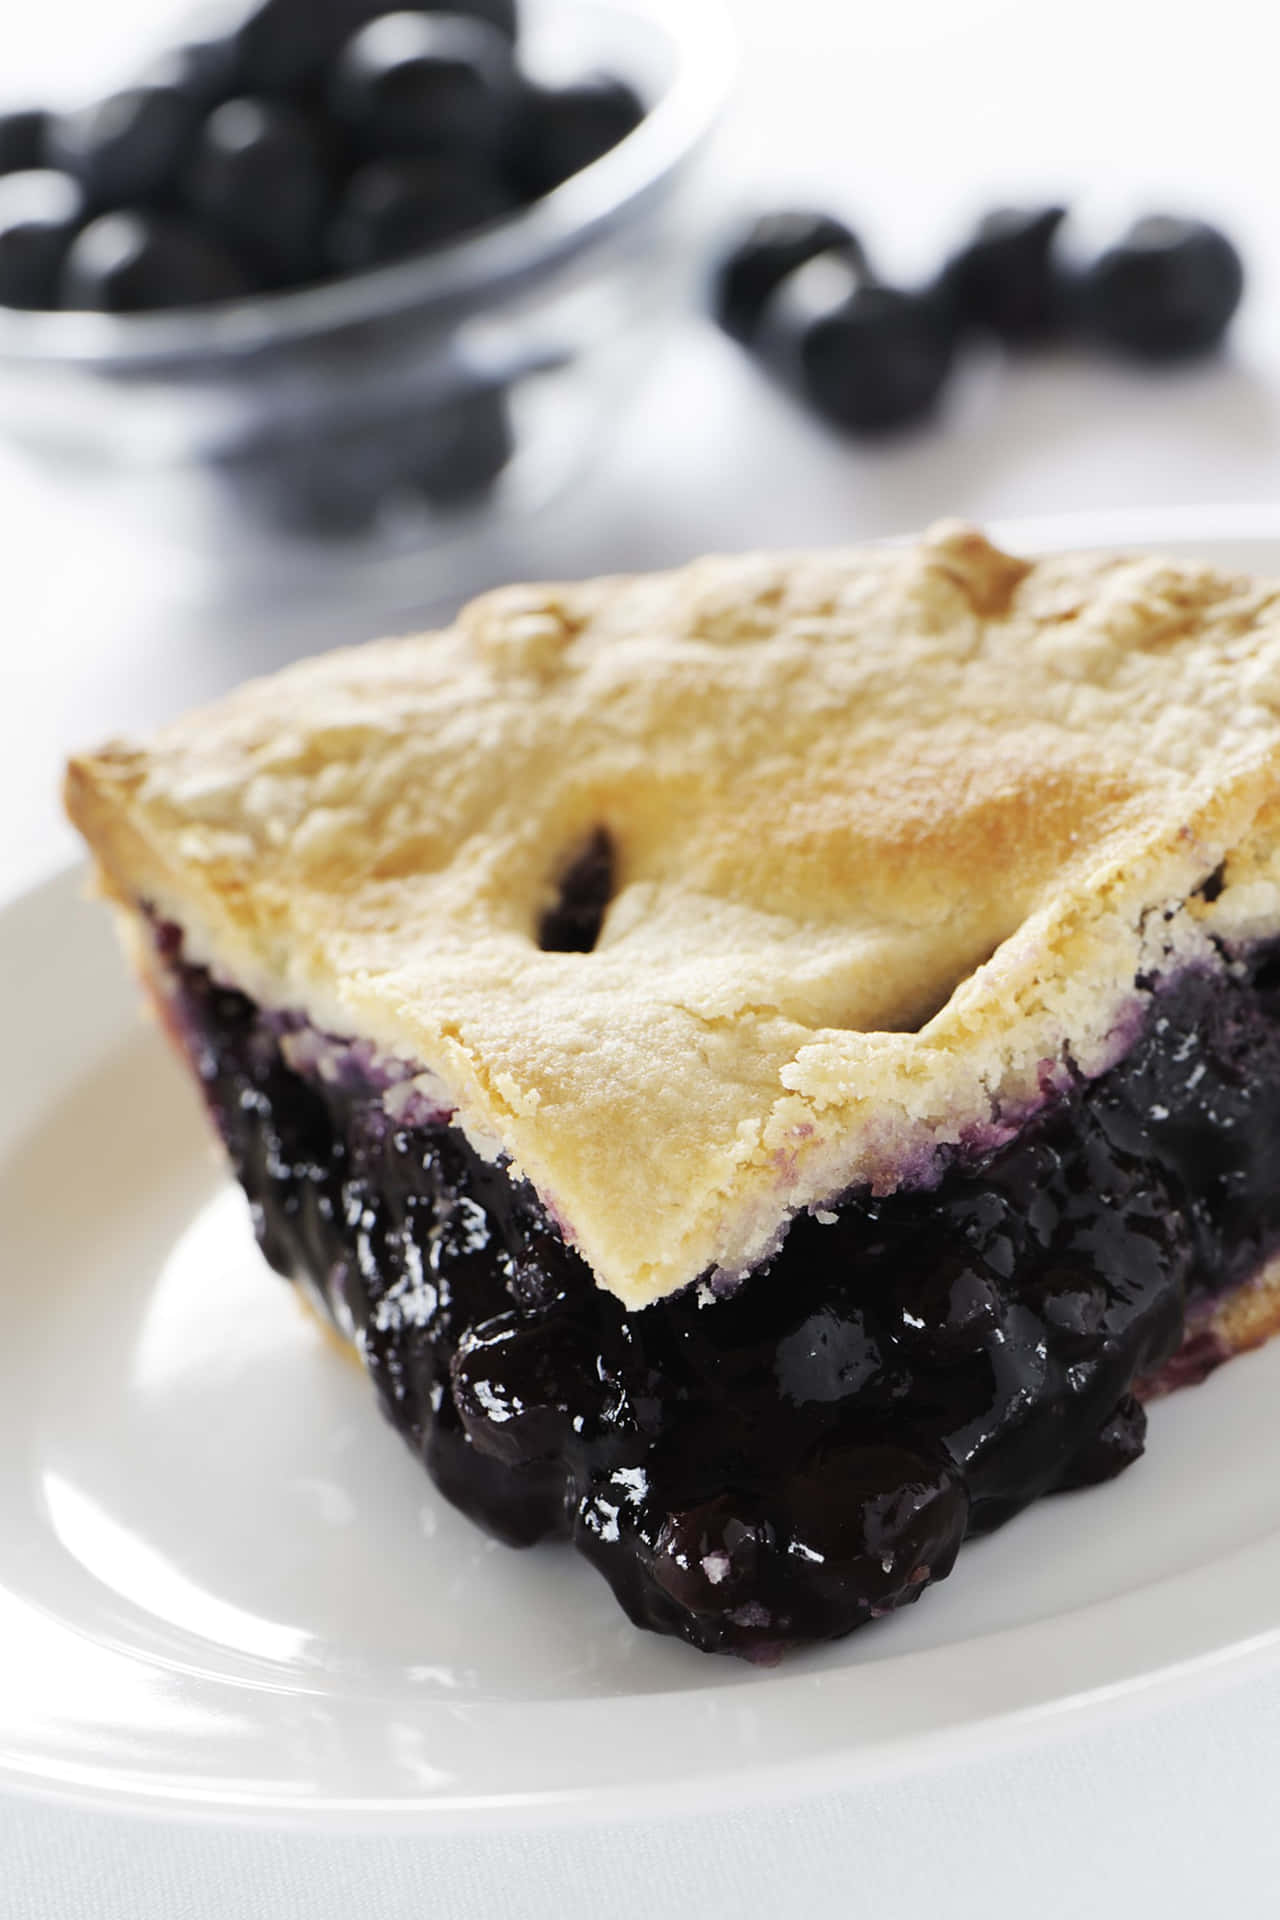 "Indulge in the sweet flavor of this blueberry pie!" Wallpaper